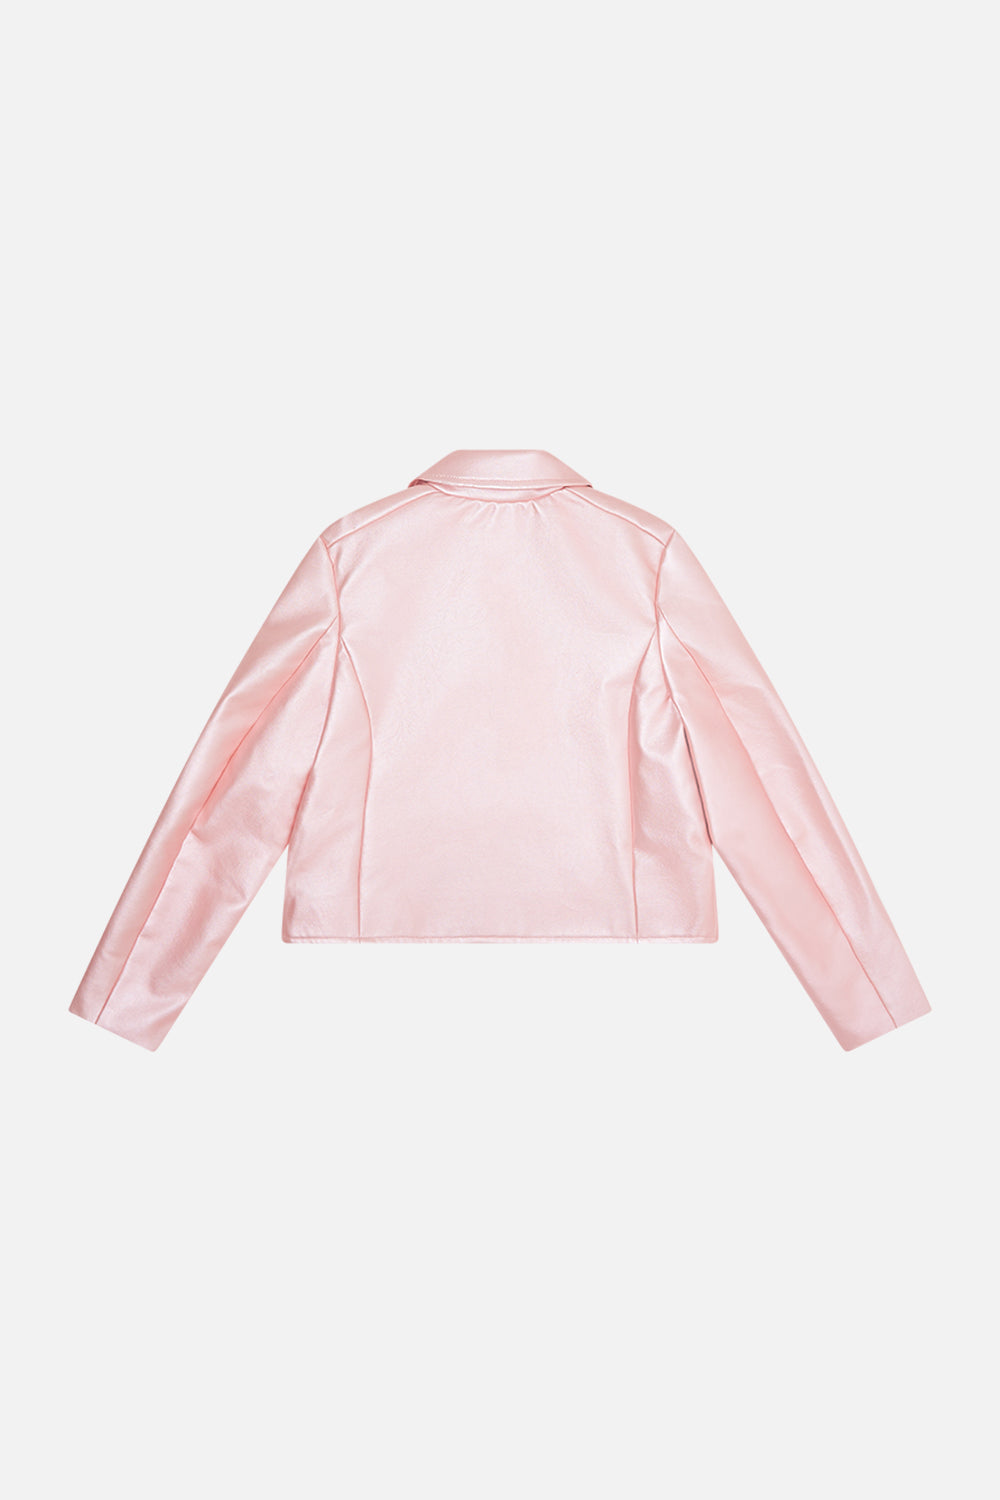 Milla bY  CAMILLA kids pink leather jacket in Clever Clogs print